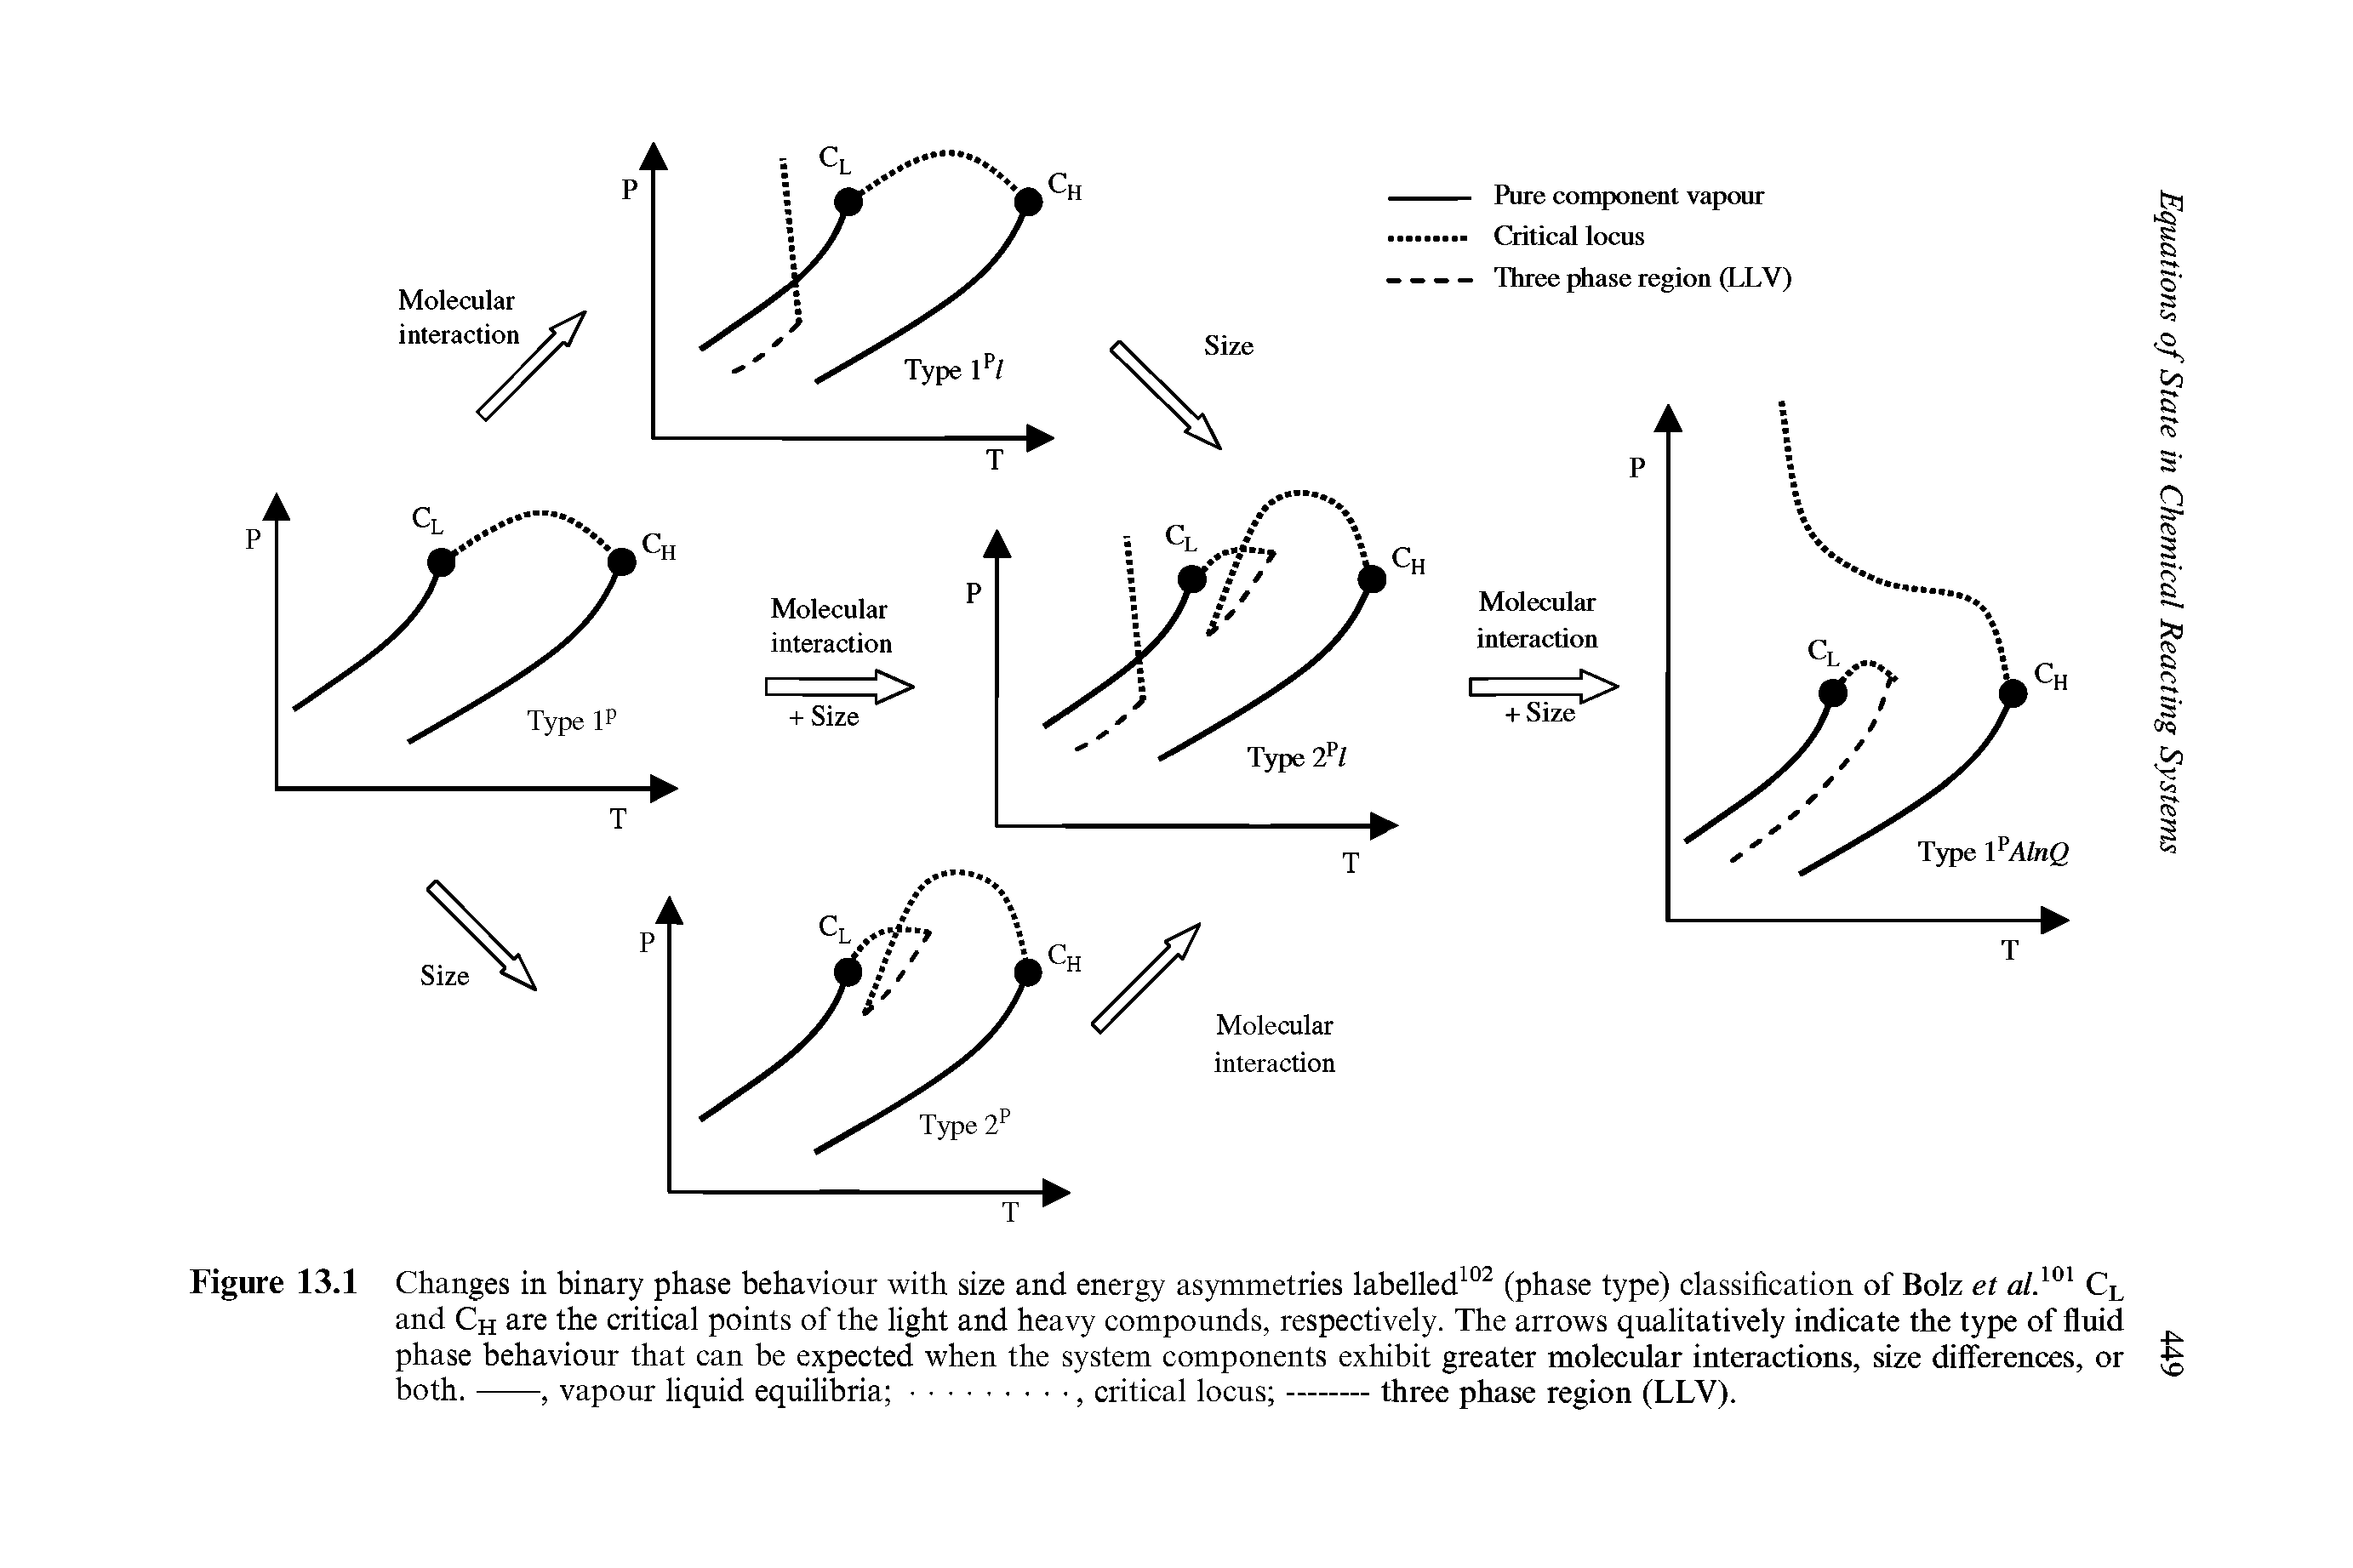 Figure 13.1 Changes in binary phase behaviour with size and energy as5mmetries labelled (phase type) classification of Bolz et u/. Cl and Ch are the critical points of the light and heavy compounds, respectively. The arrows qualitatively indicate the type of fluid phase behaviour that can be expected when the system components exhibit greater molecular interactions, size differences, or both.-----------------------, vapour liquid equilibria ., critical locus --------three phase region (LLV).